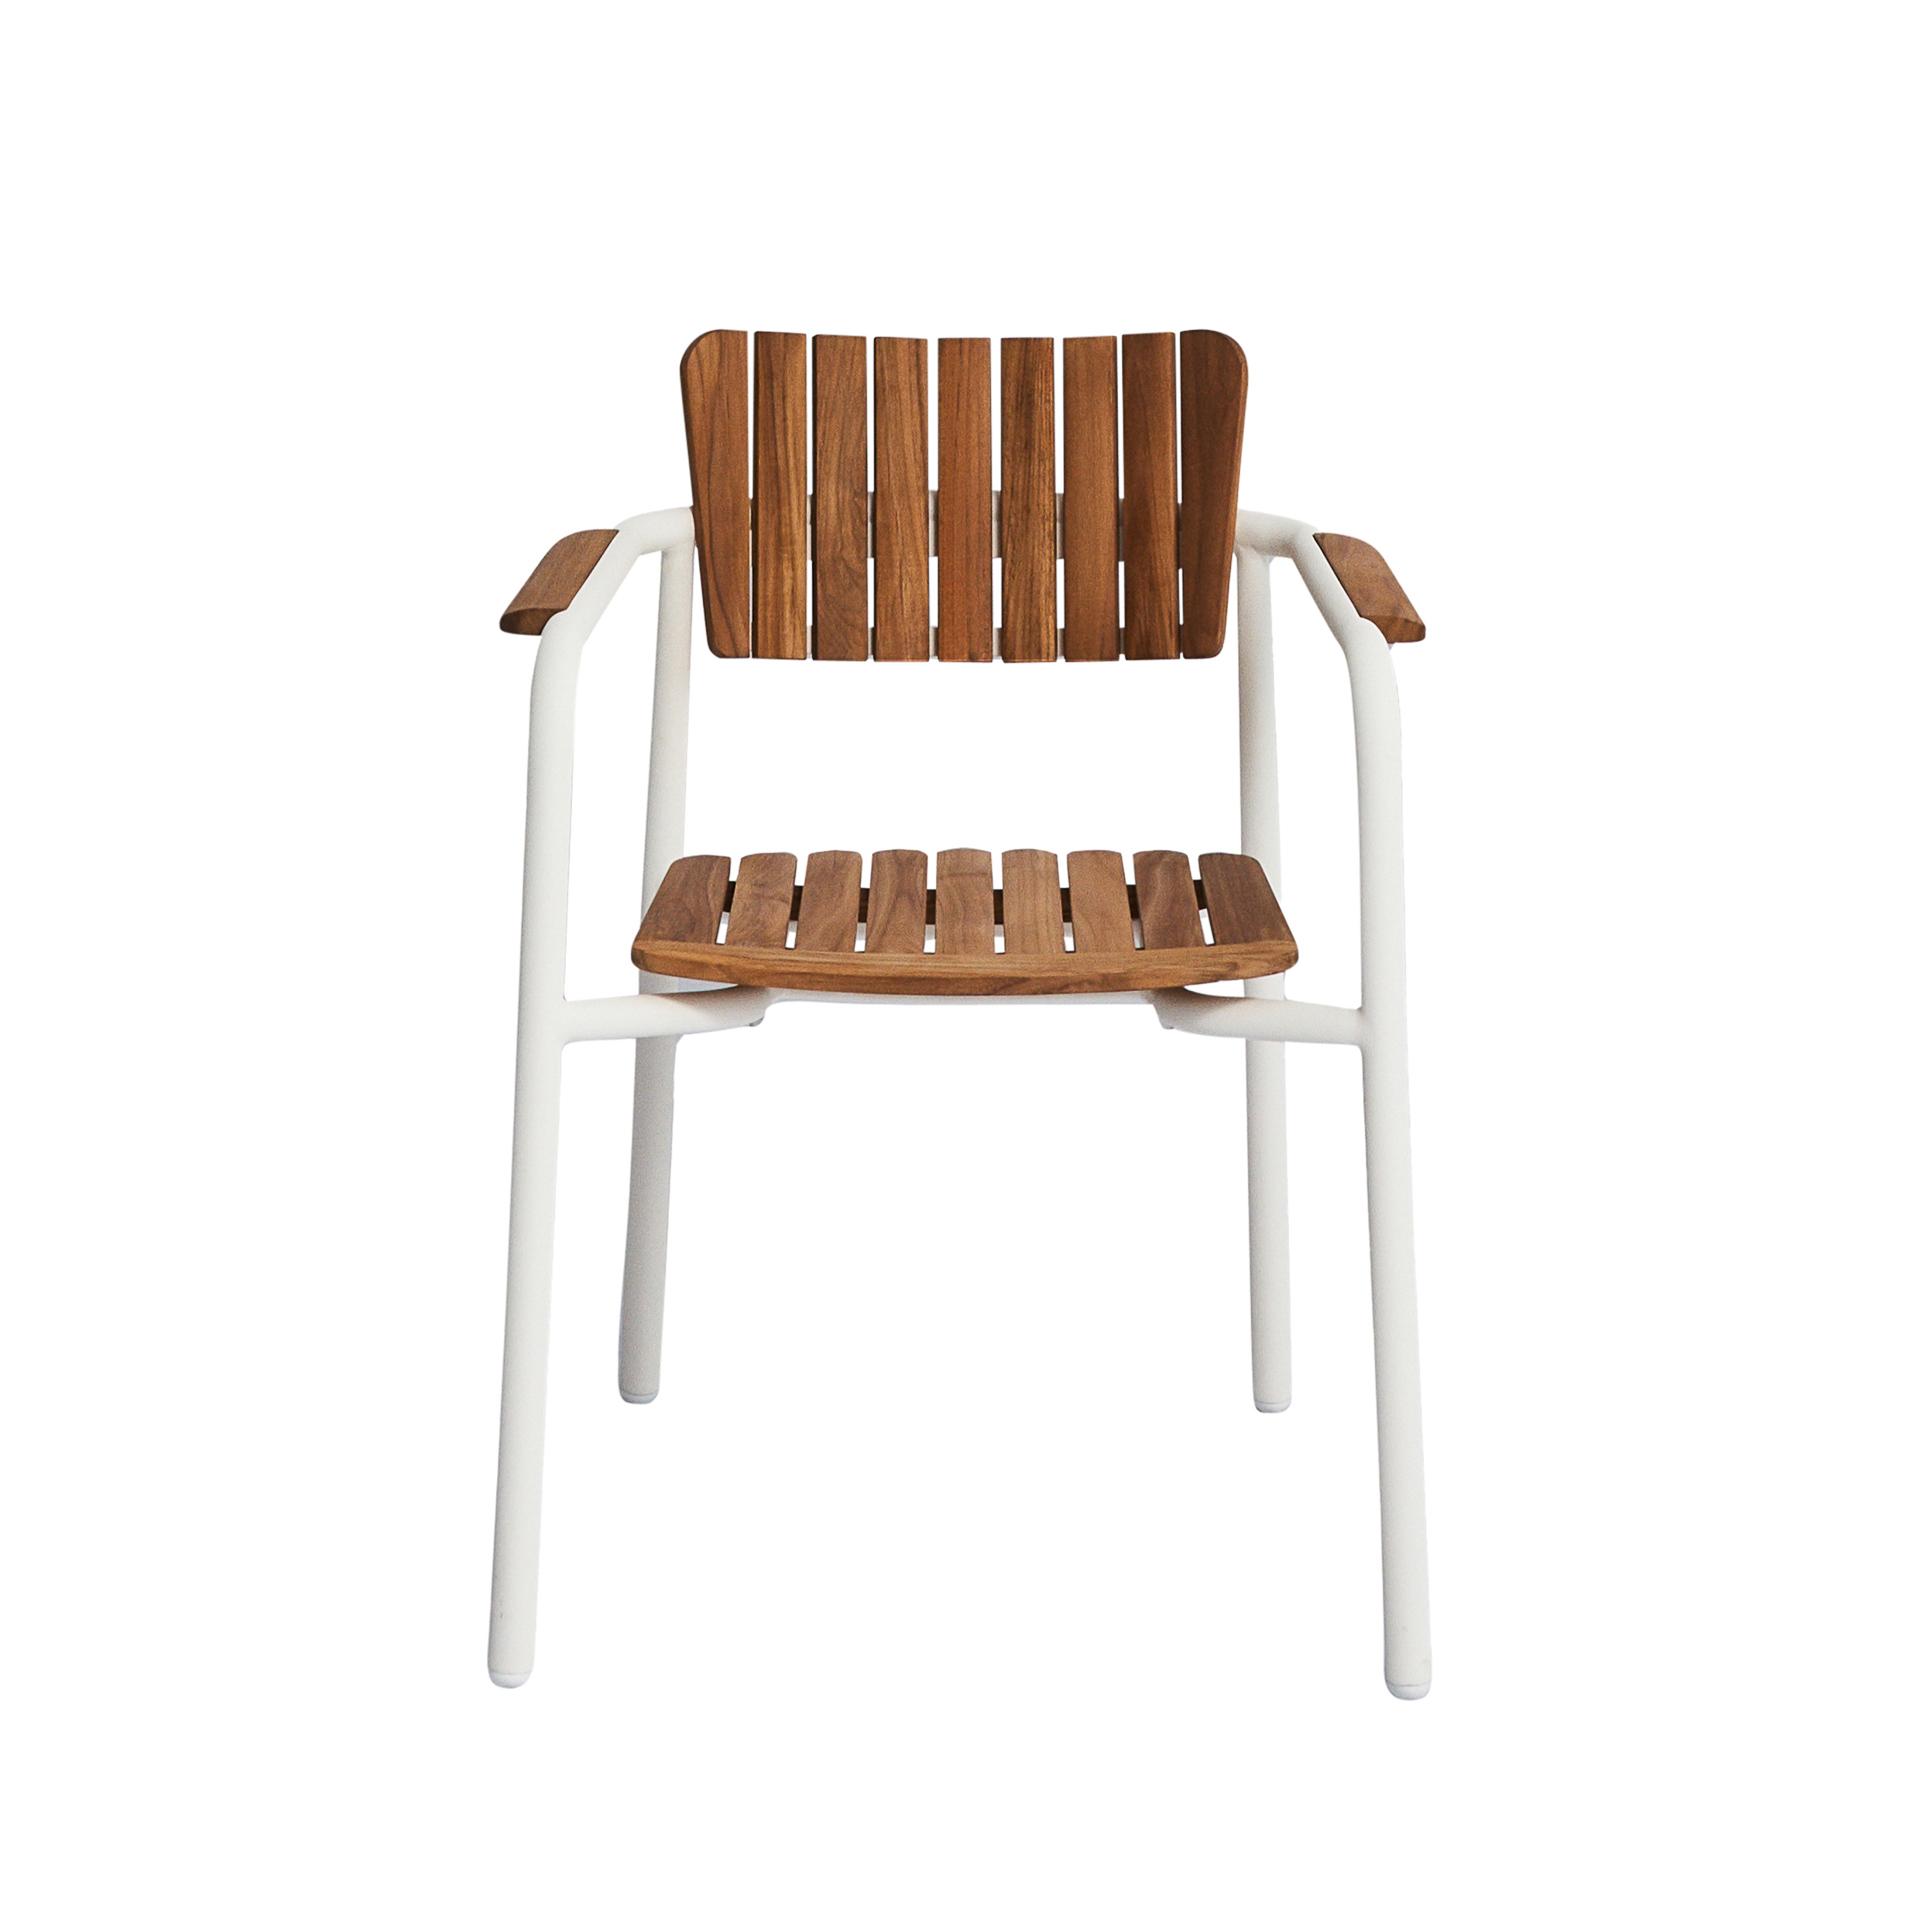 MINDO // MINDO 119 DINING CHAIR W ARMS | OFF WHITE